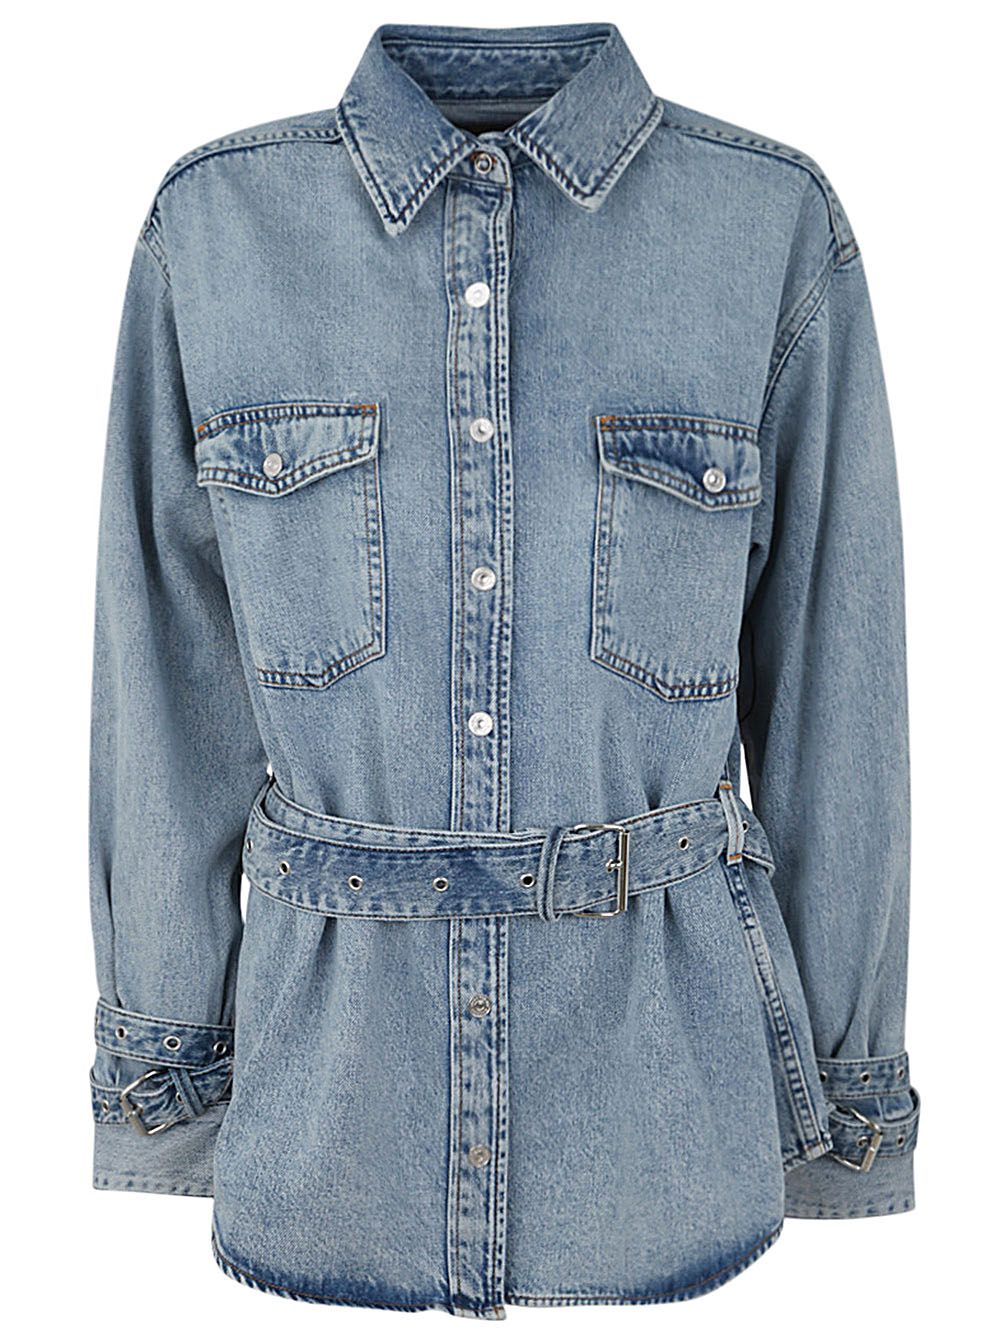 Seven For All Mankind Chiara Biasi X 7fam Belted Overshirt Unwind In Blue